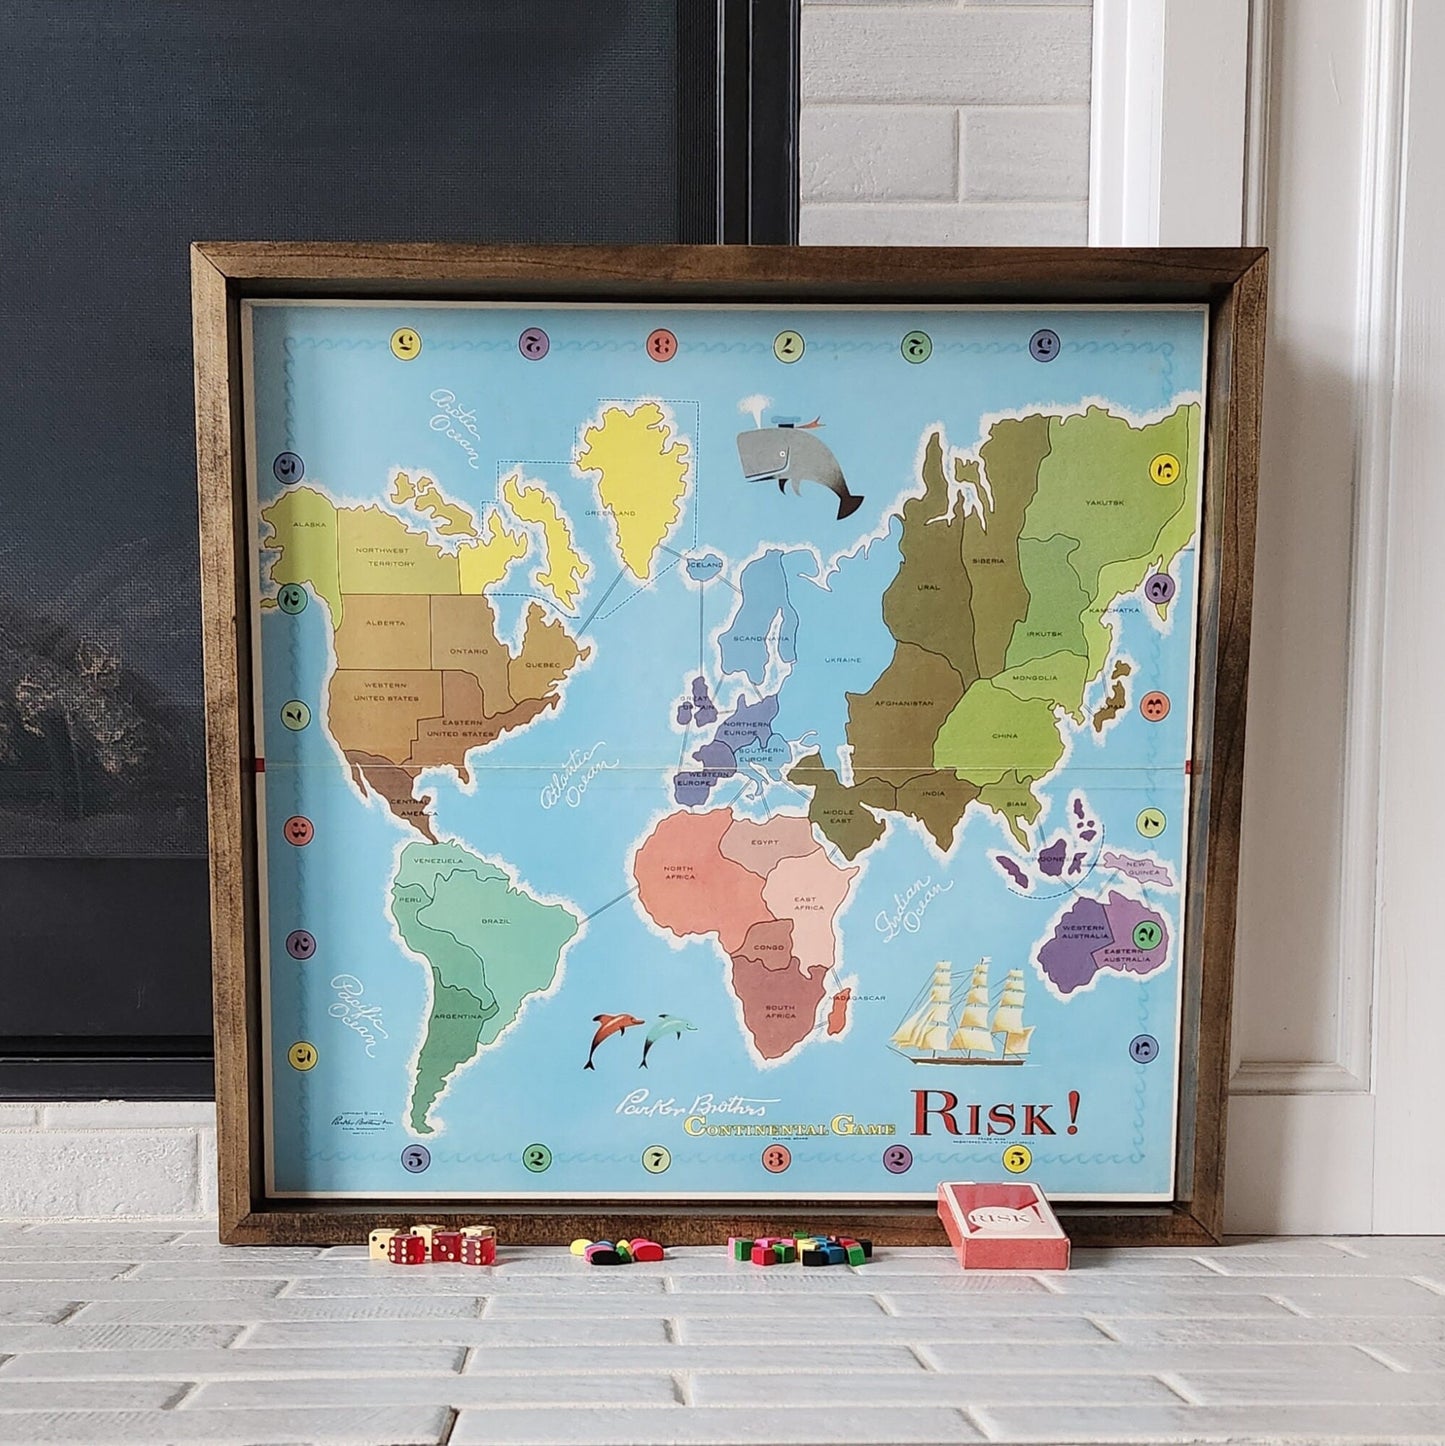 Display and Play 1963 RISK Handmade Framed Board Game